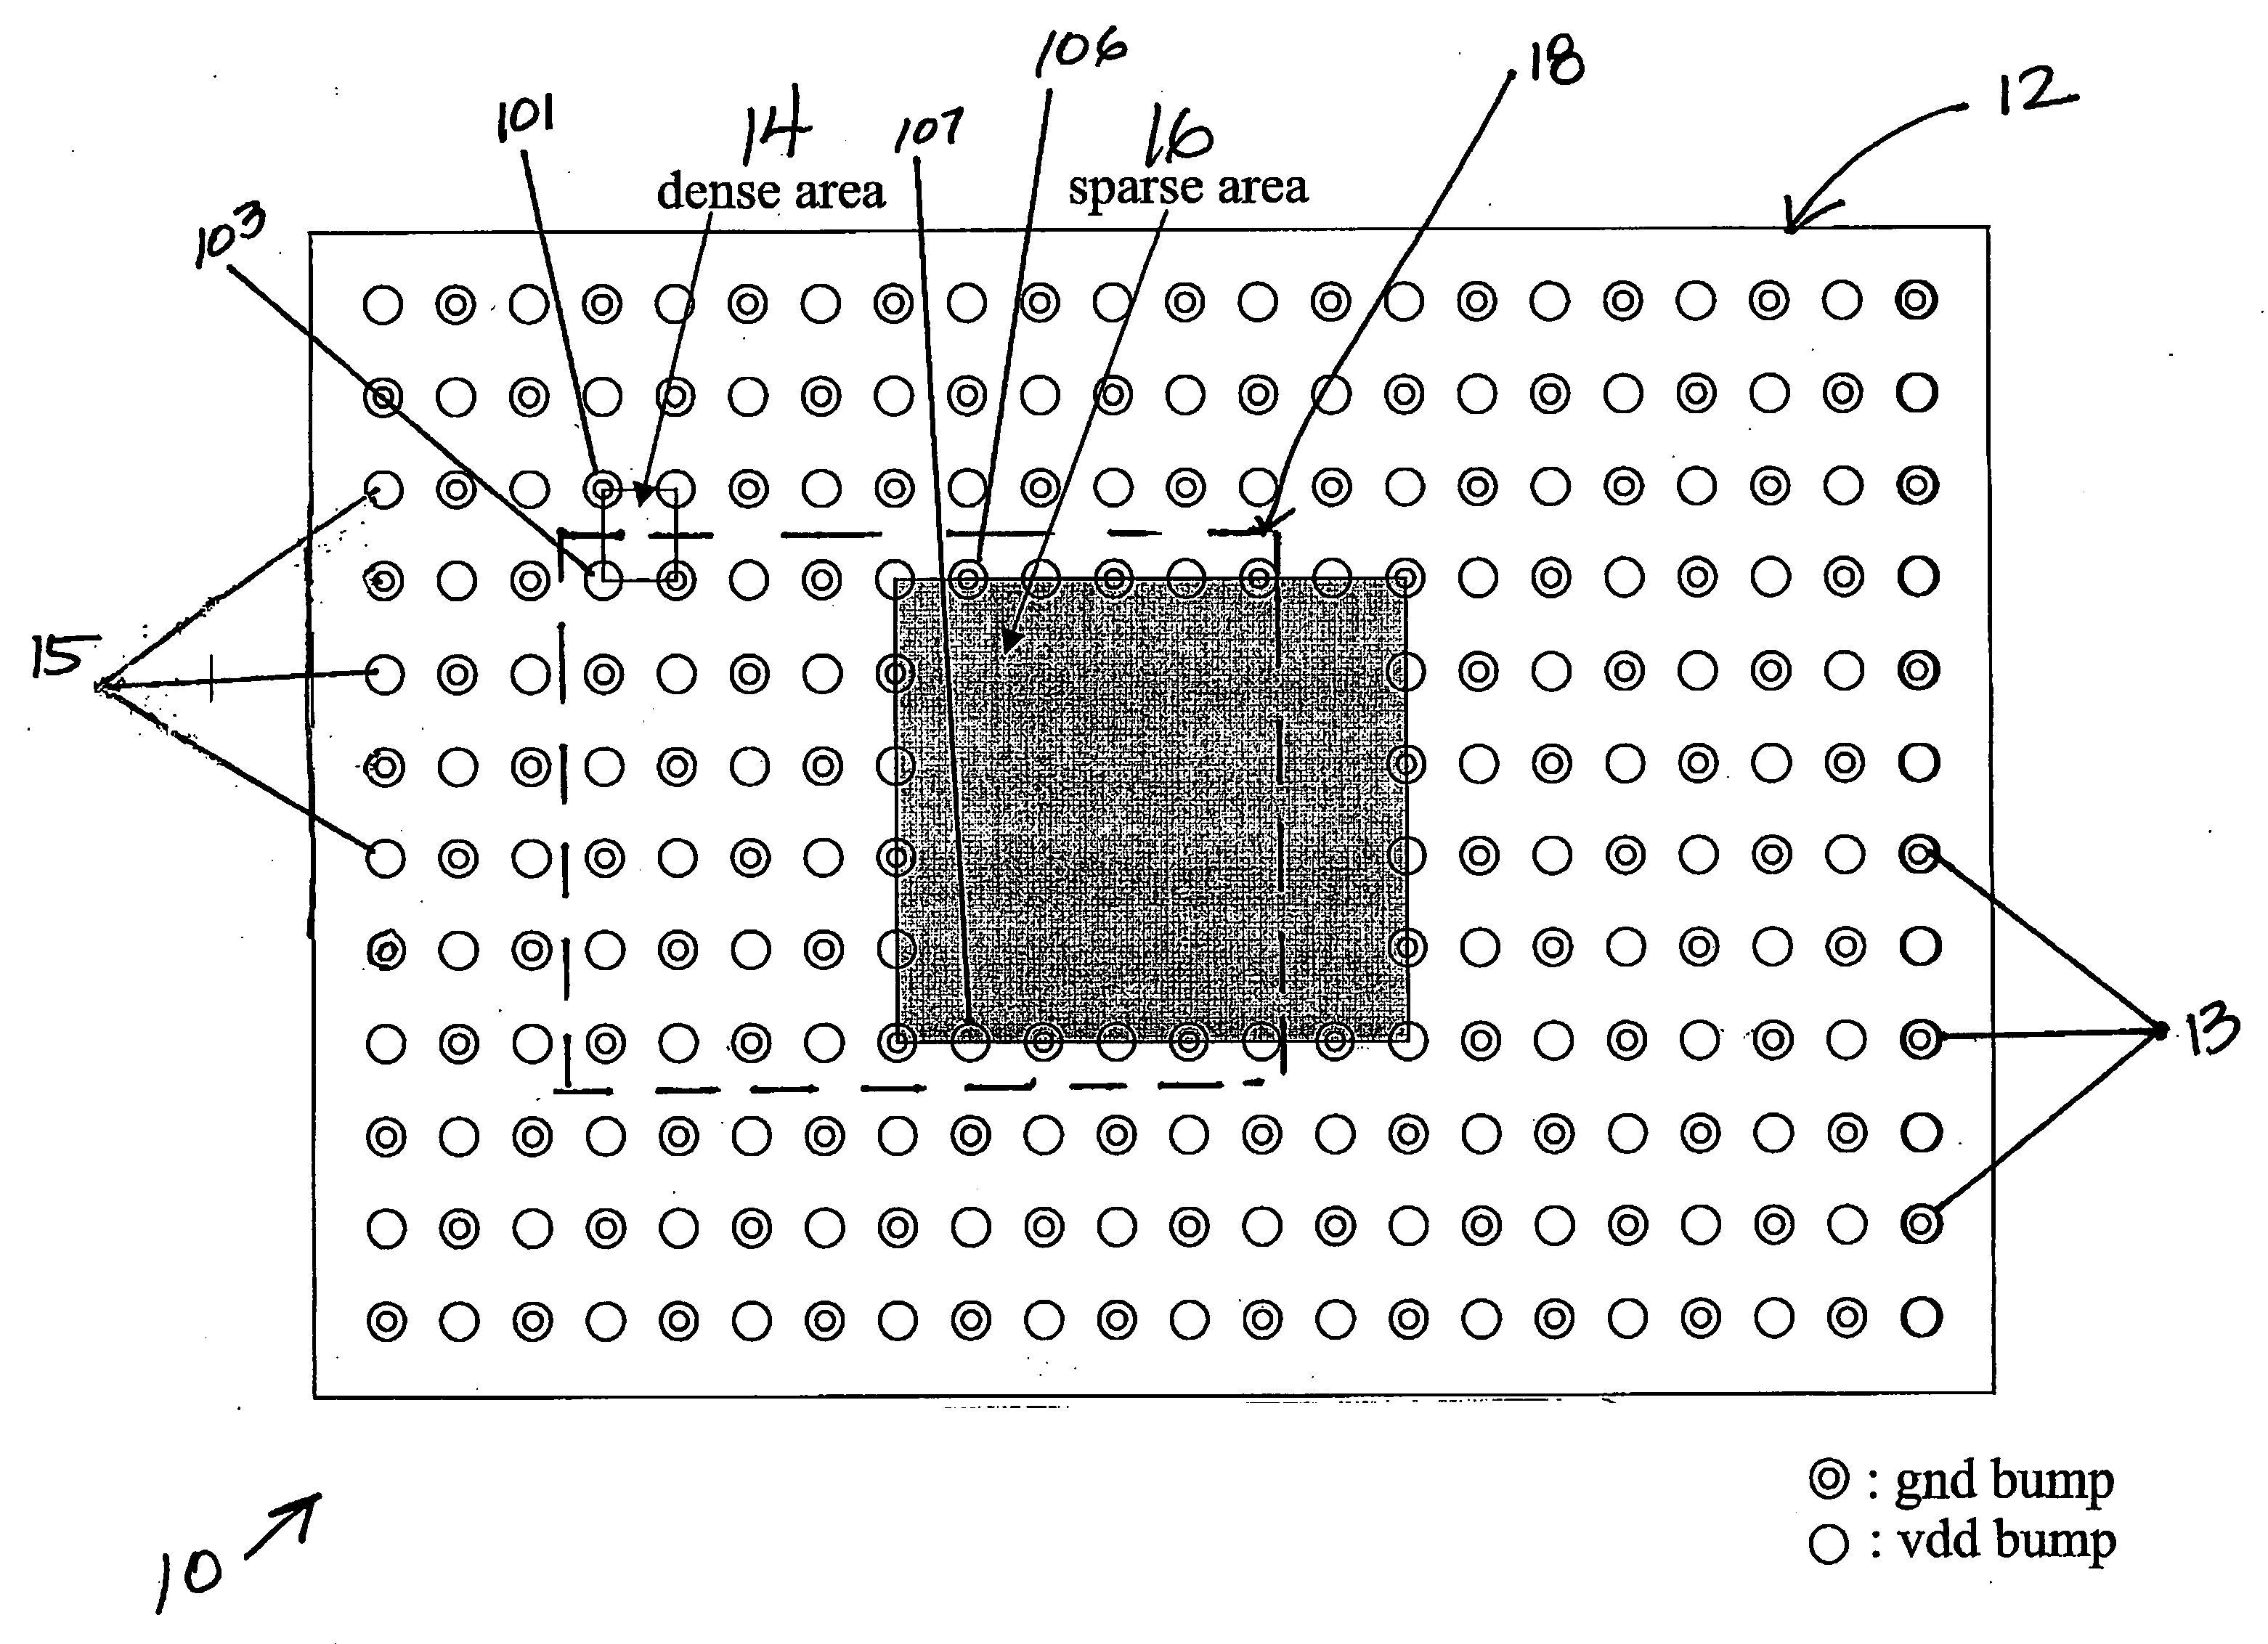 System and method for configuring conductors within an integrated circuit to reduce impedance variation caused by connection bumps